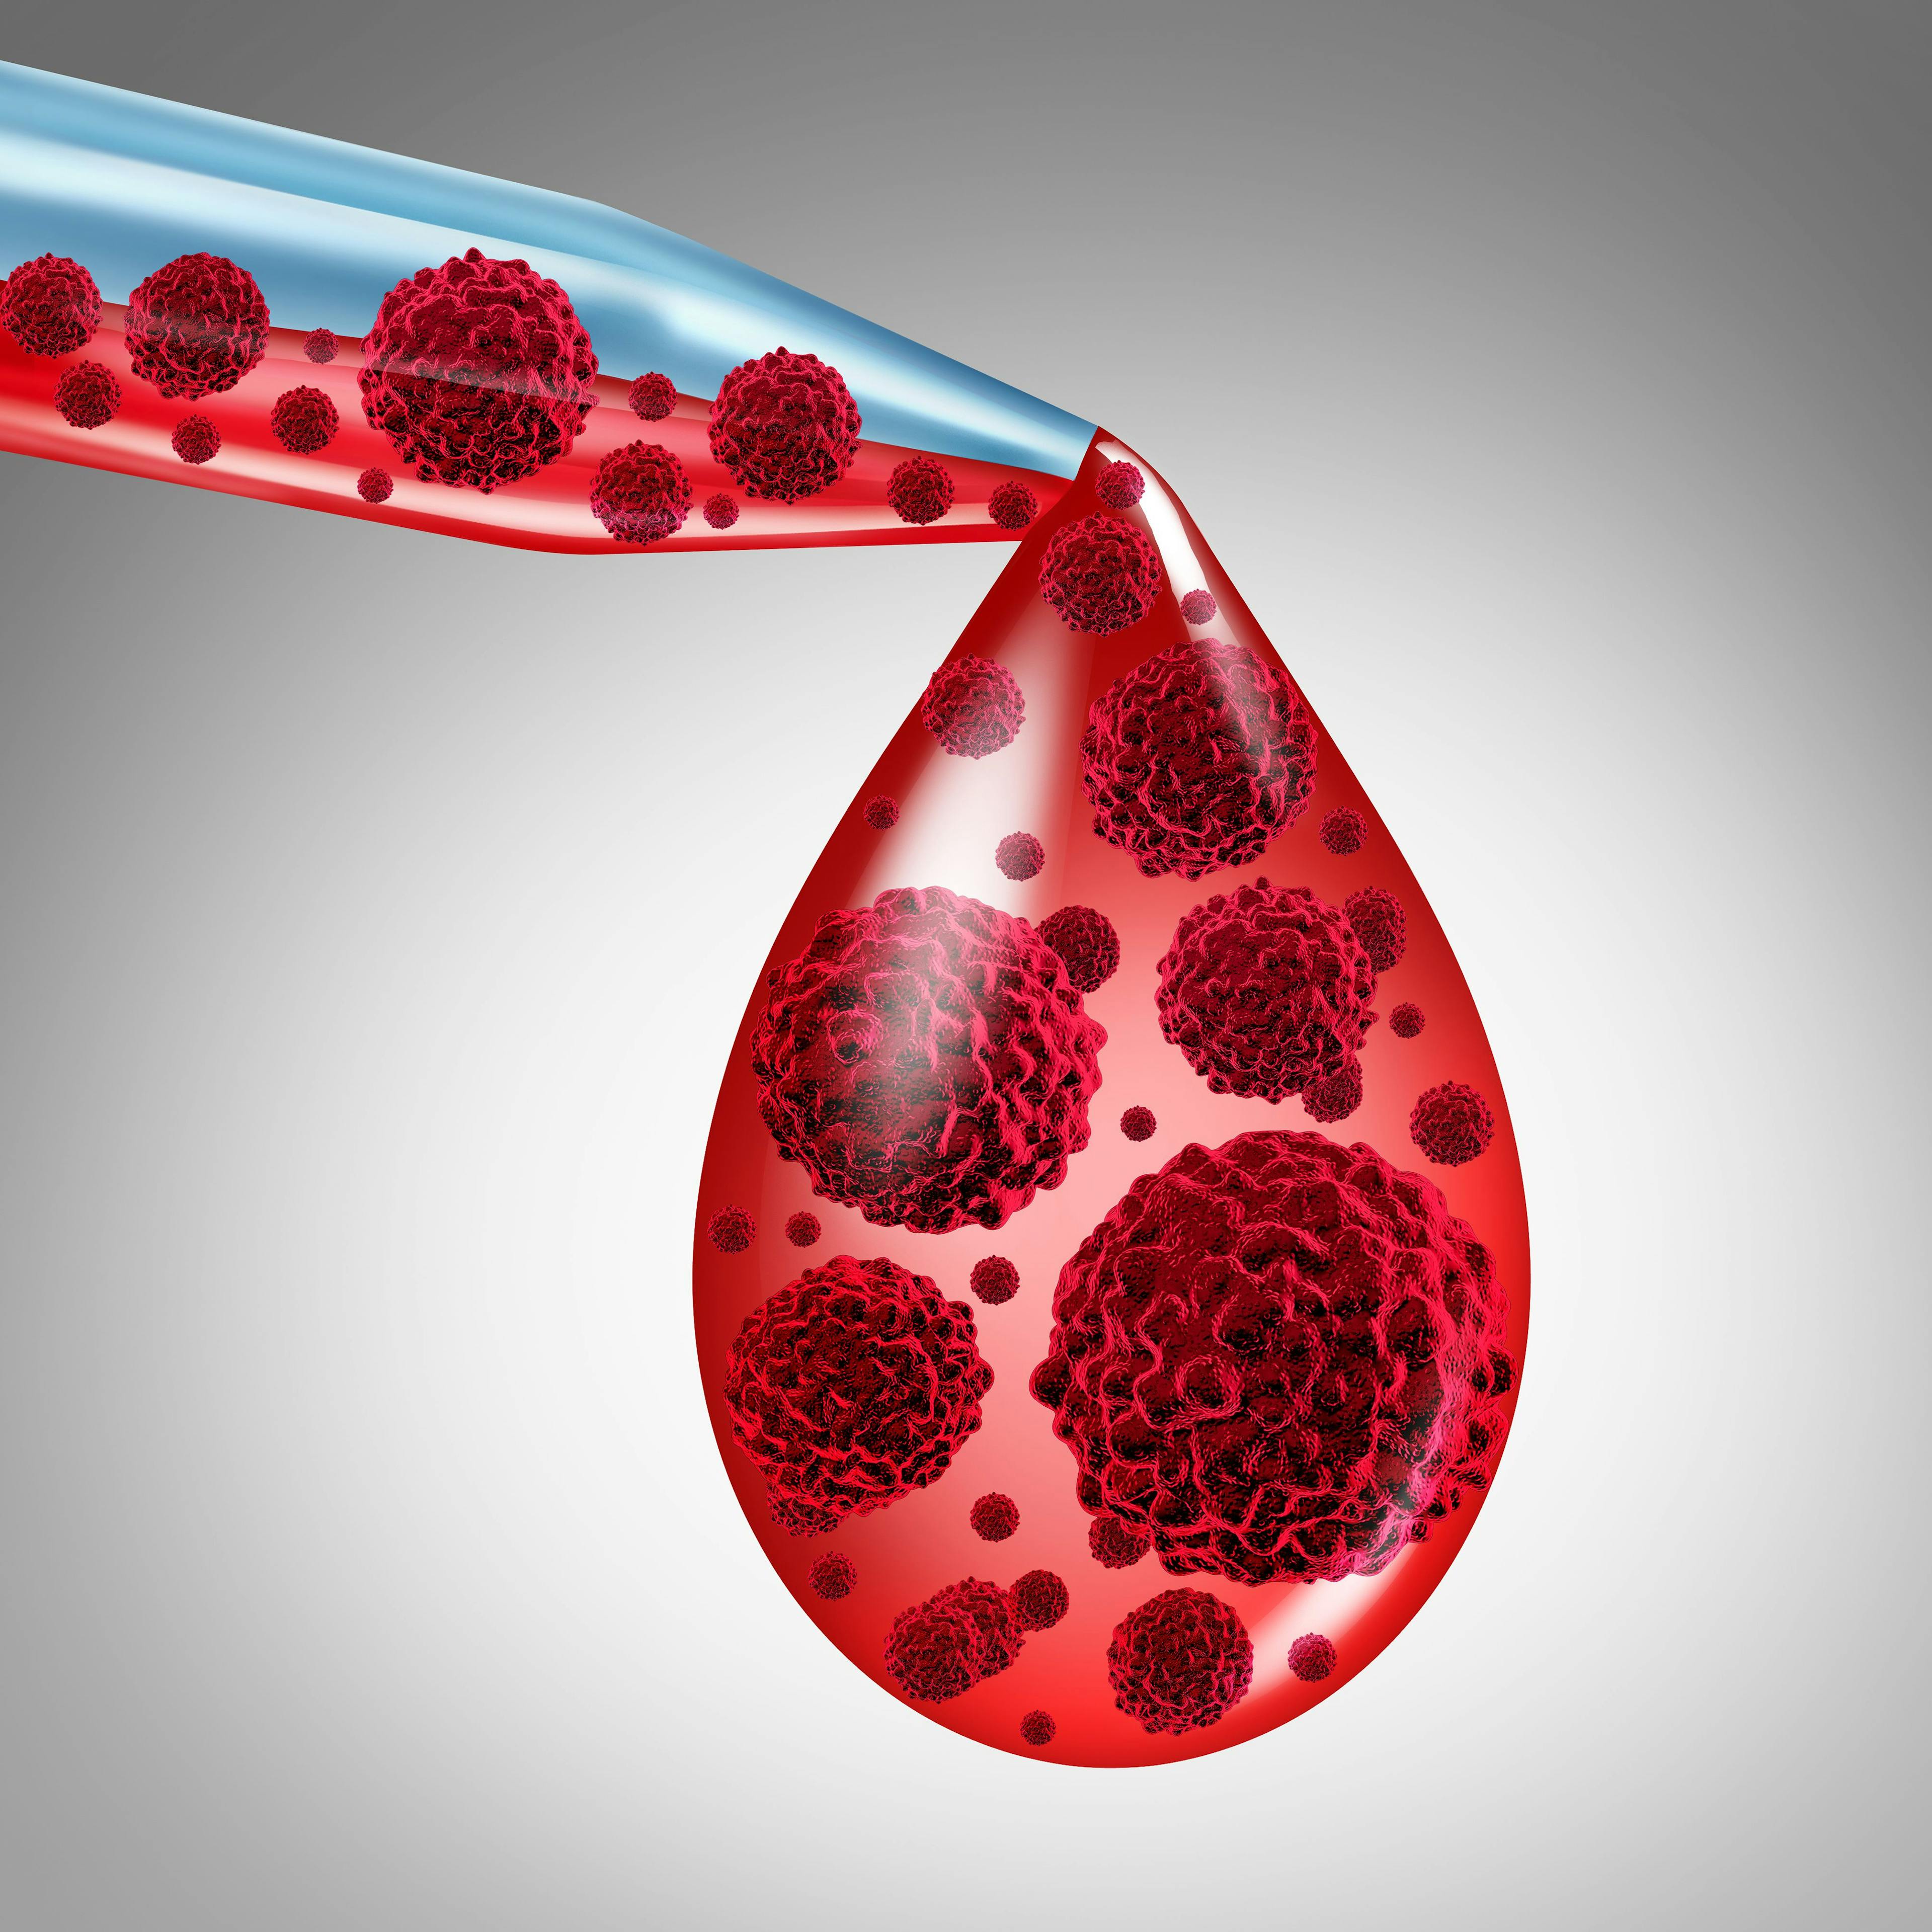 Liquid Biopsy to Detect Early-Stage Liver Cancer Shows Higher Sensitivity, Specificity